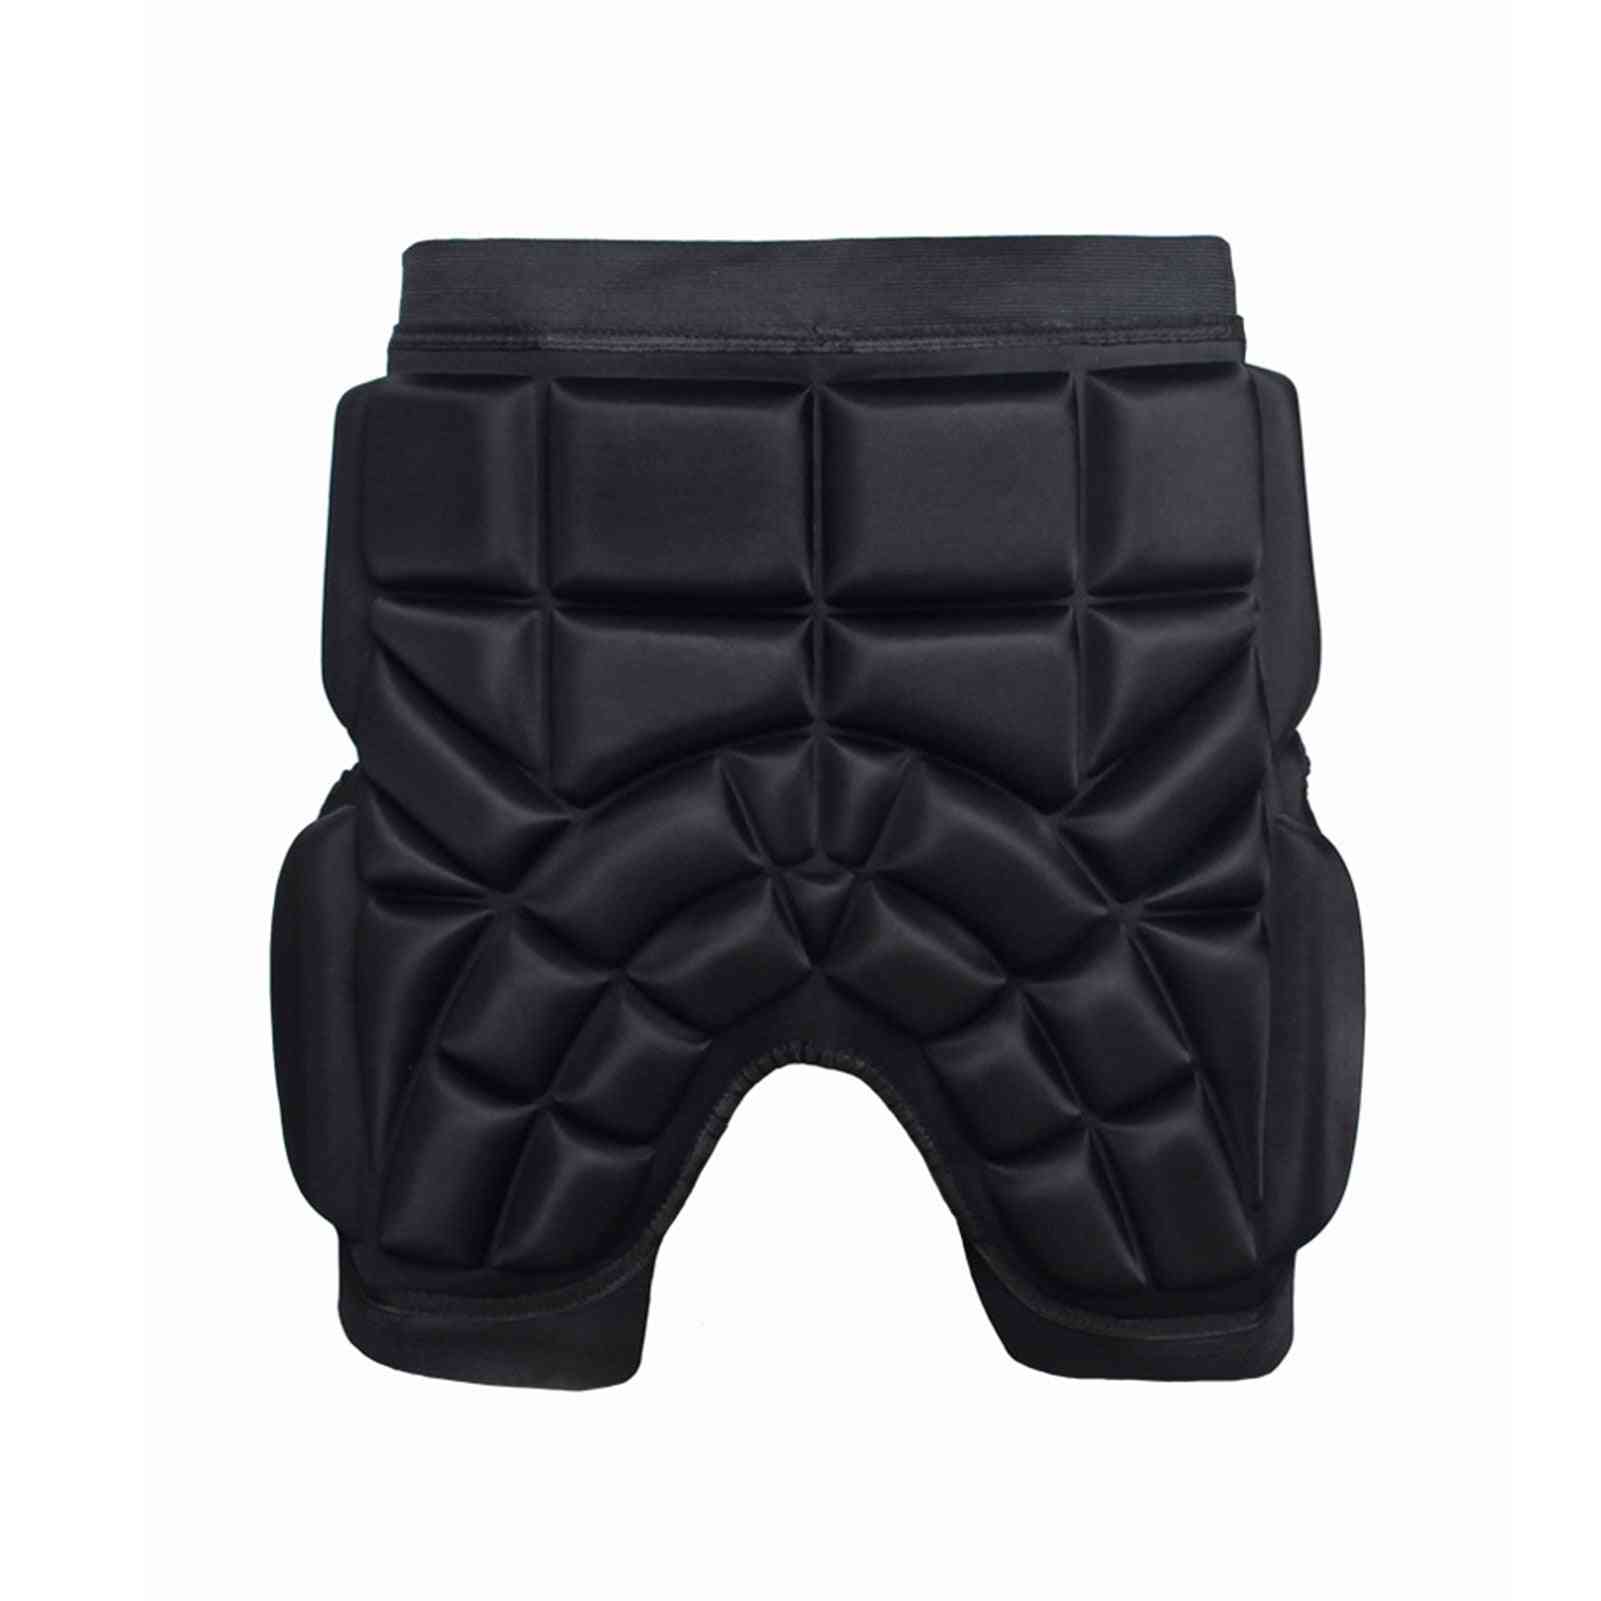 3d Padded Shorts Hip Protective Gear Guard